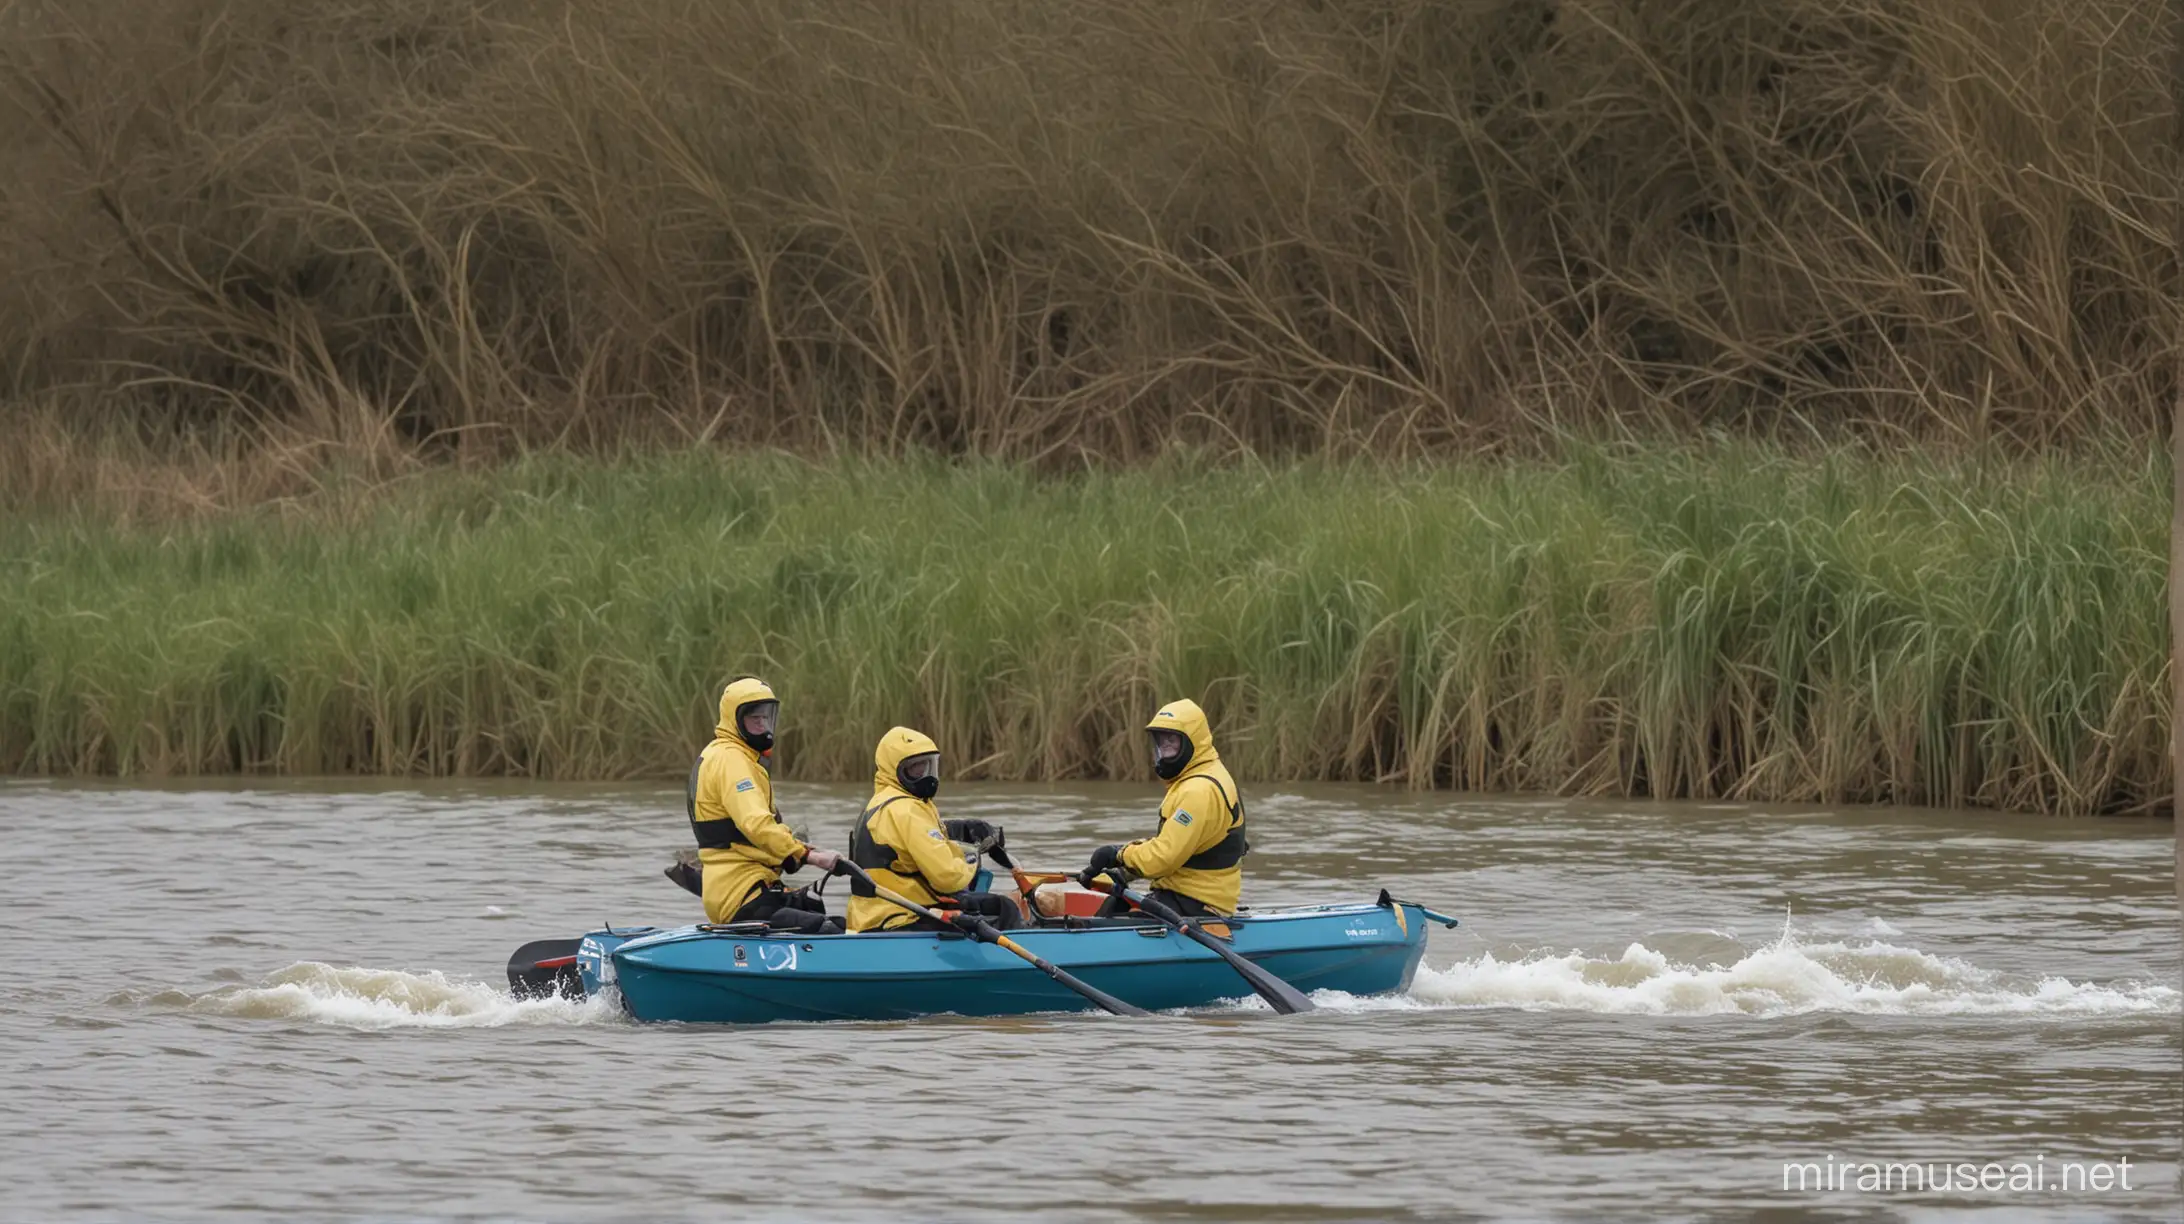 Oxford vs Cambridge Boat Race with HazmatSuited Rowers on a Choppy River